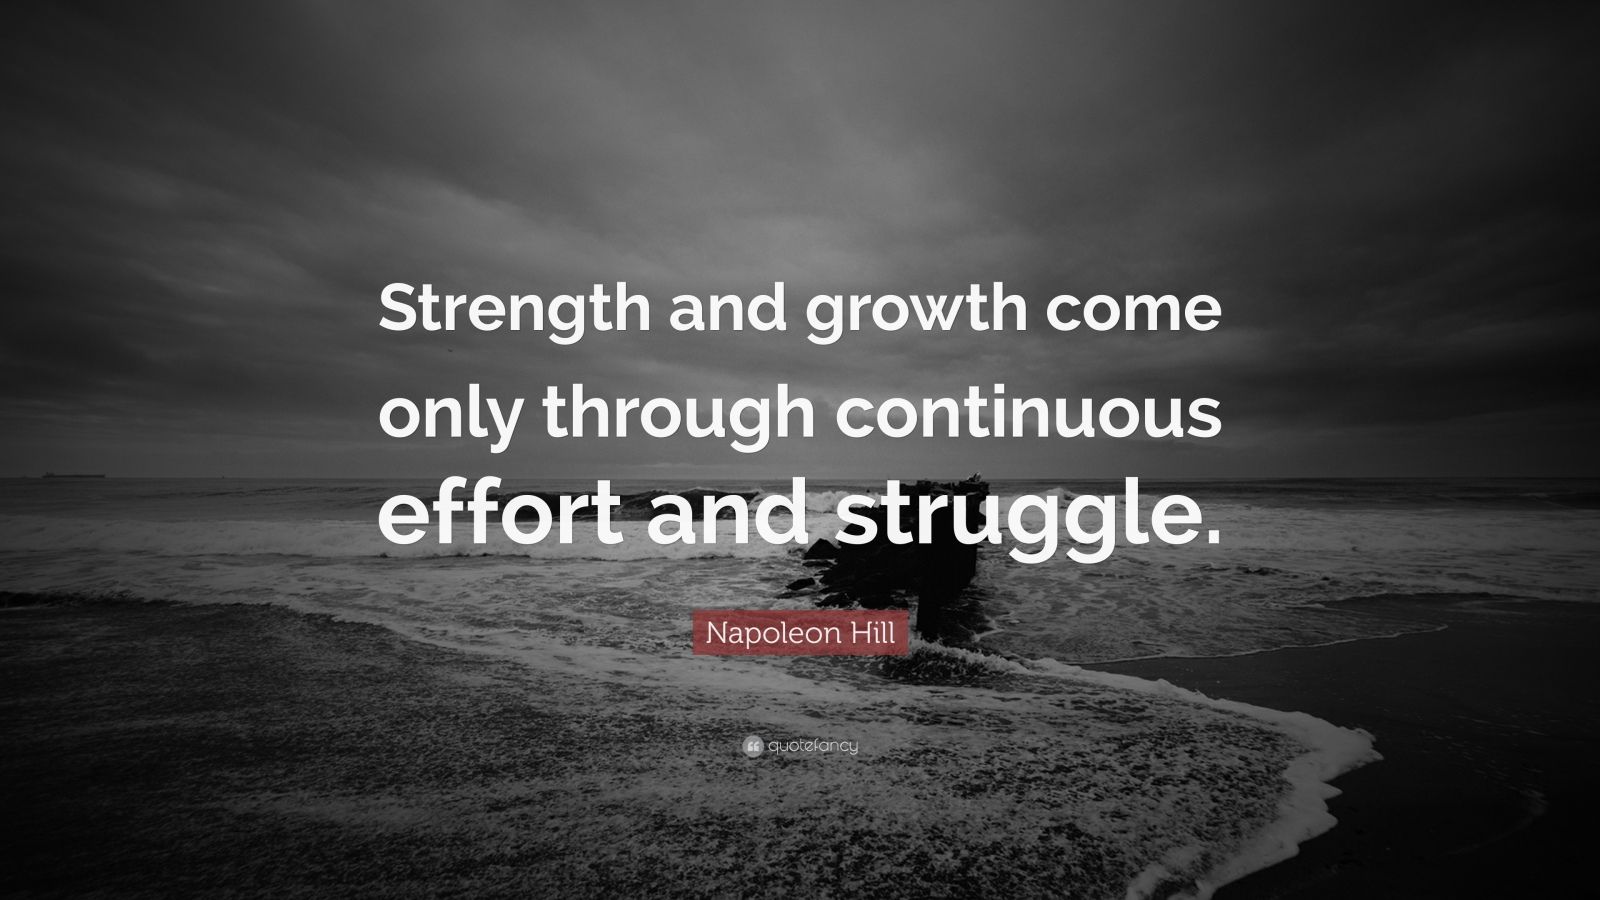 Quotes About Strength (23 wallpapers) - Quotefancy